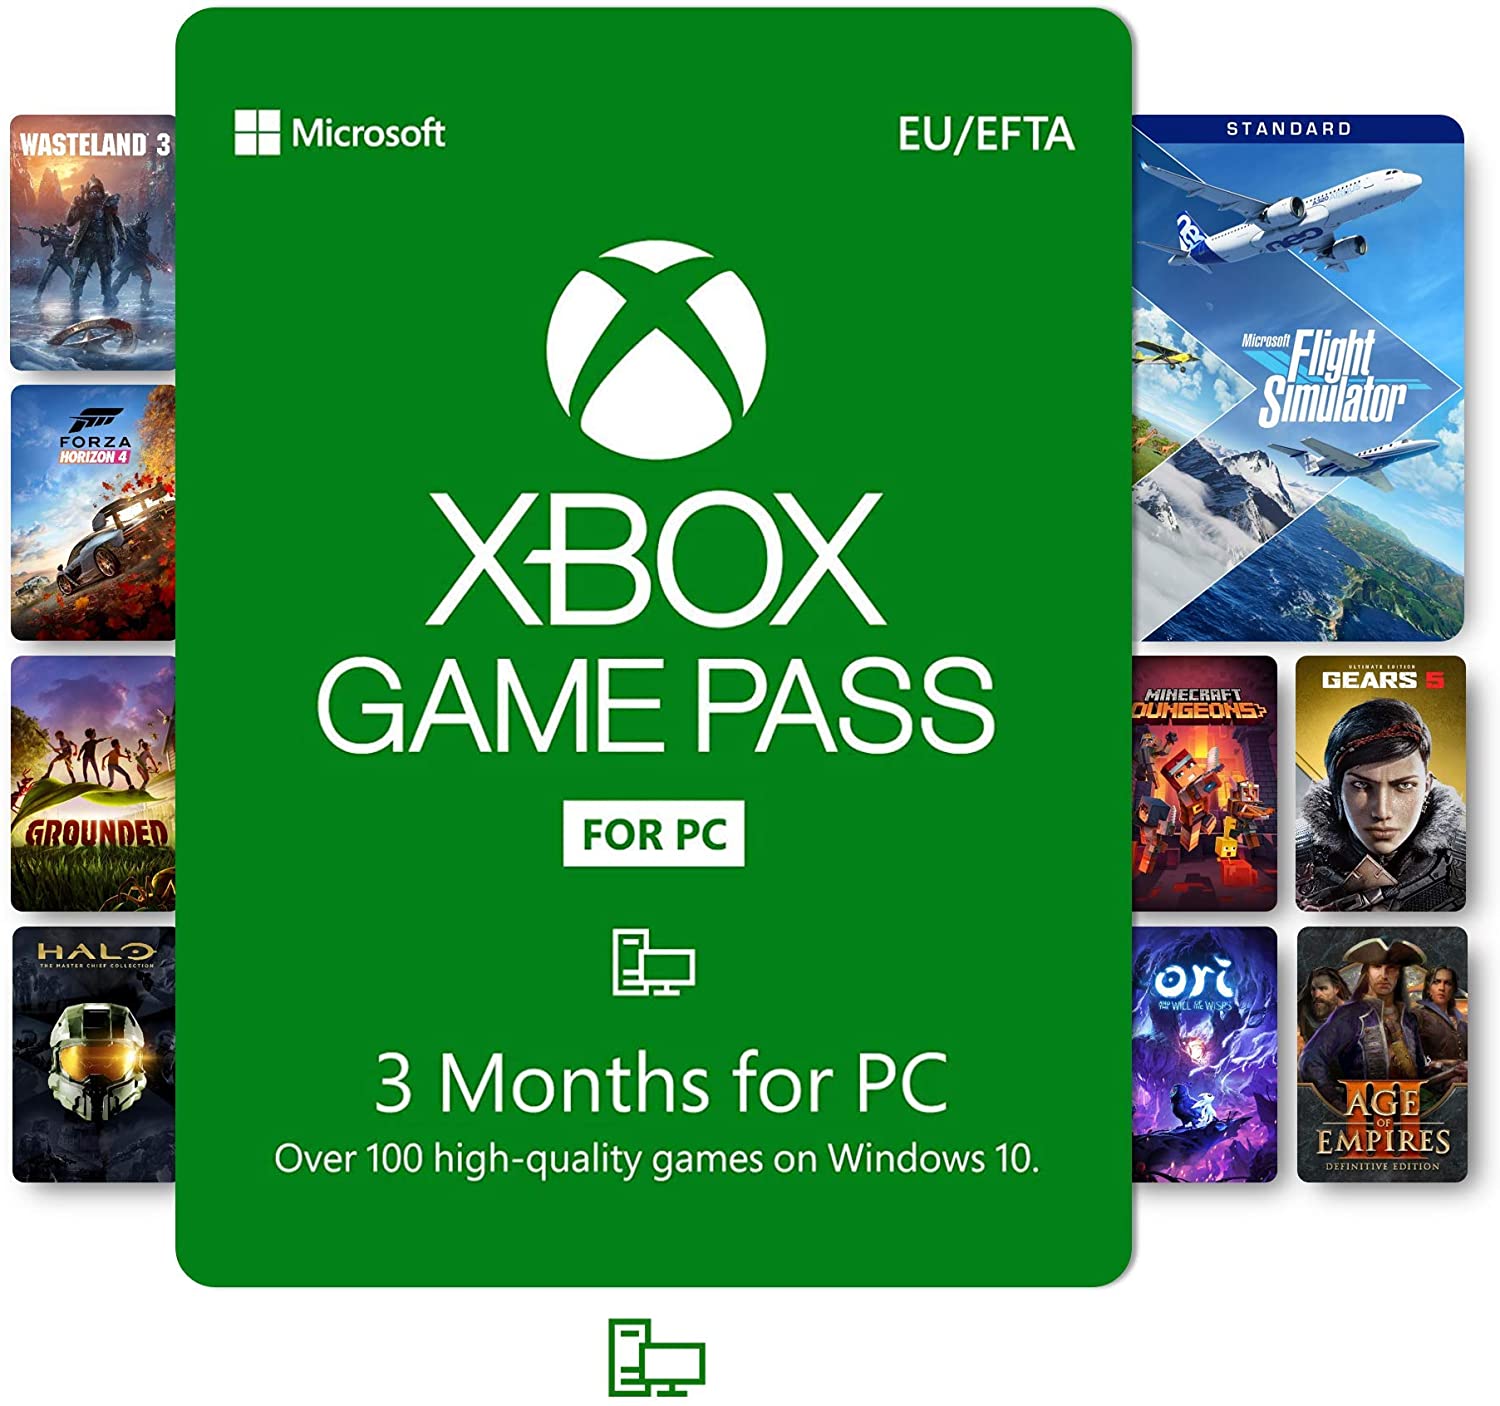 Xbox Game Pass 3 Month Key (for PC): Full Code (Global) - 